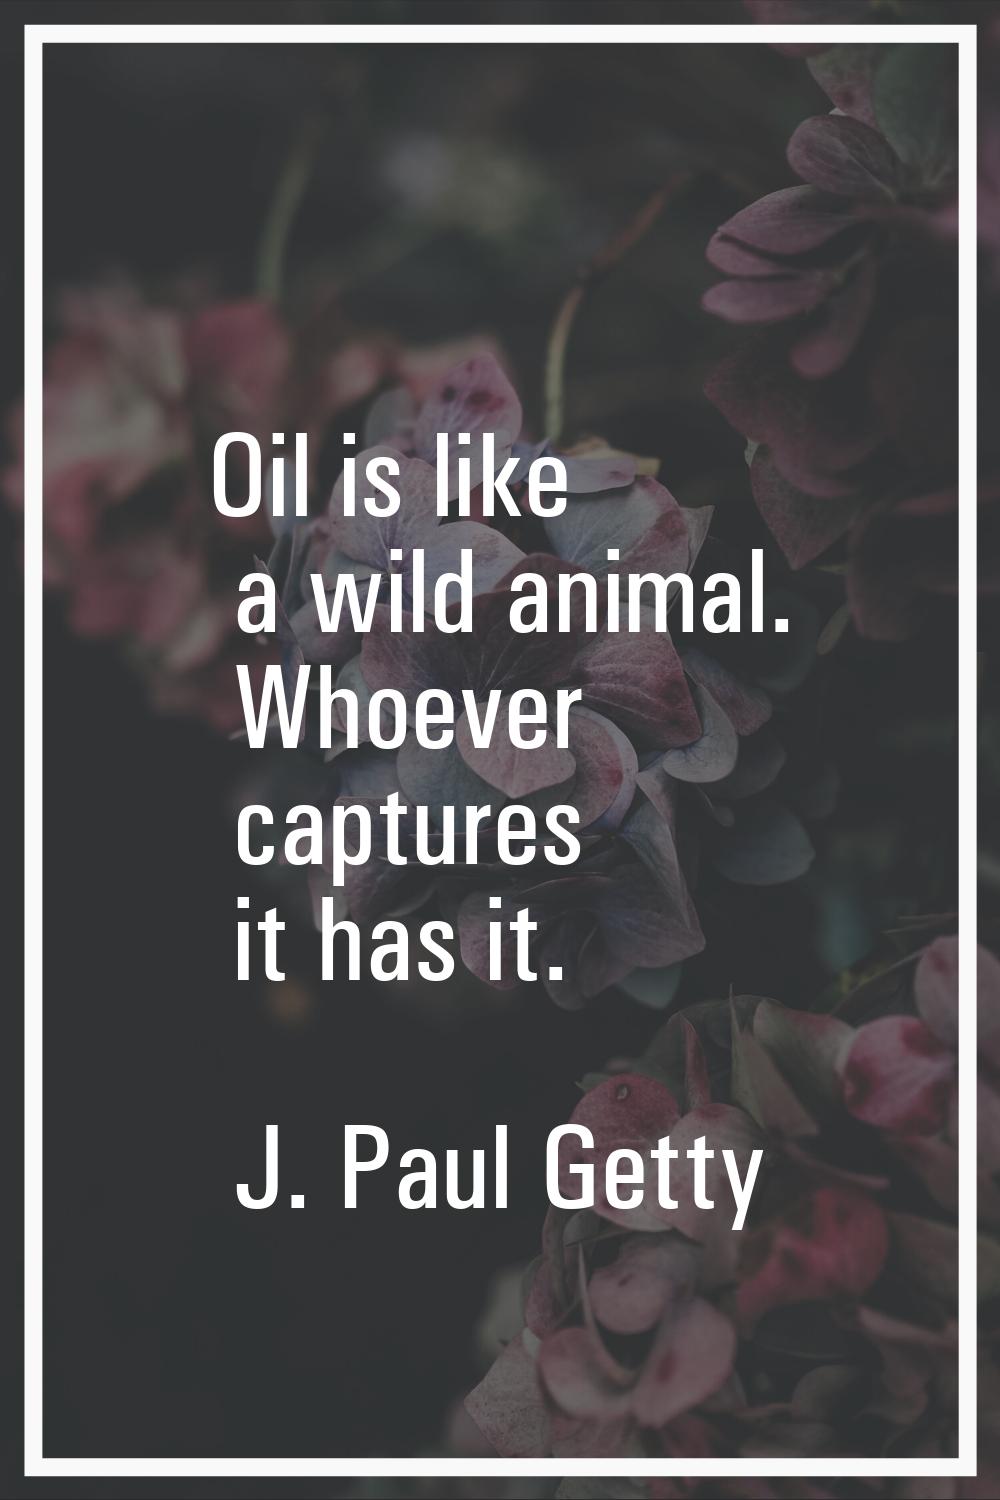 Oil is like a wild animal. Whoever captures it has it.